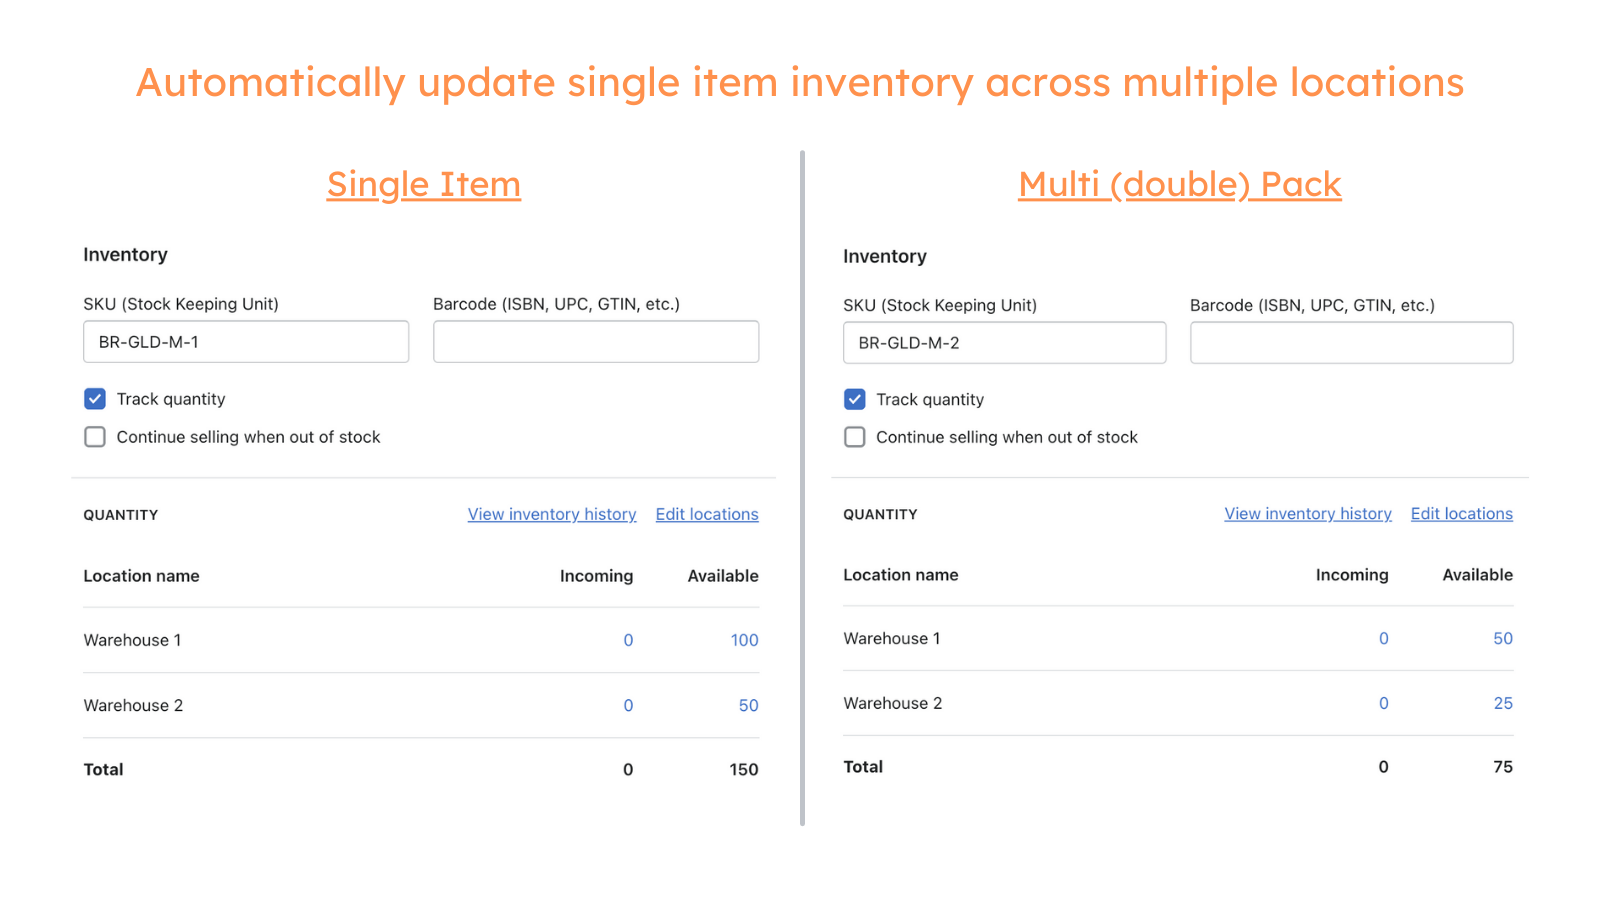 Automatically update inventory across multiple locations